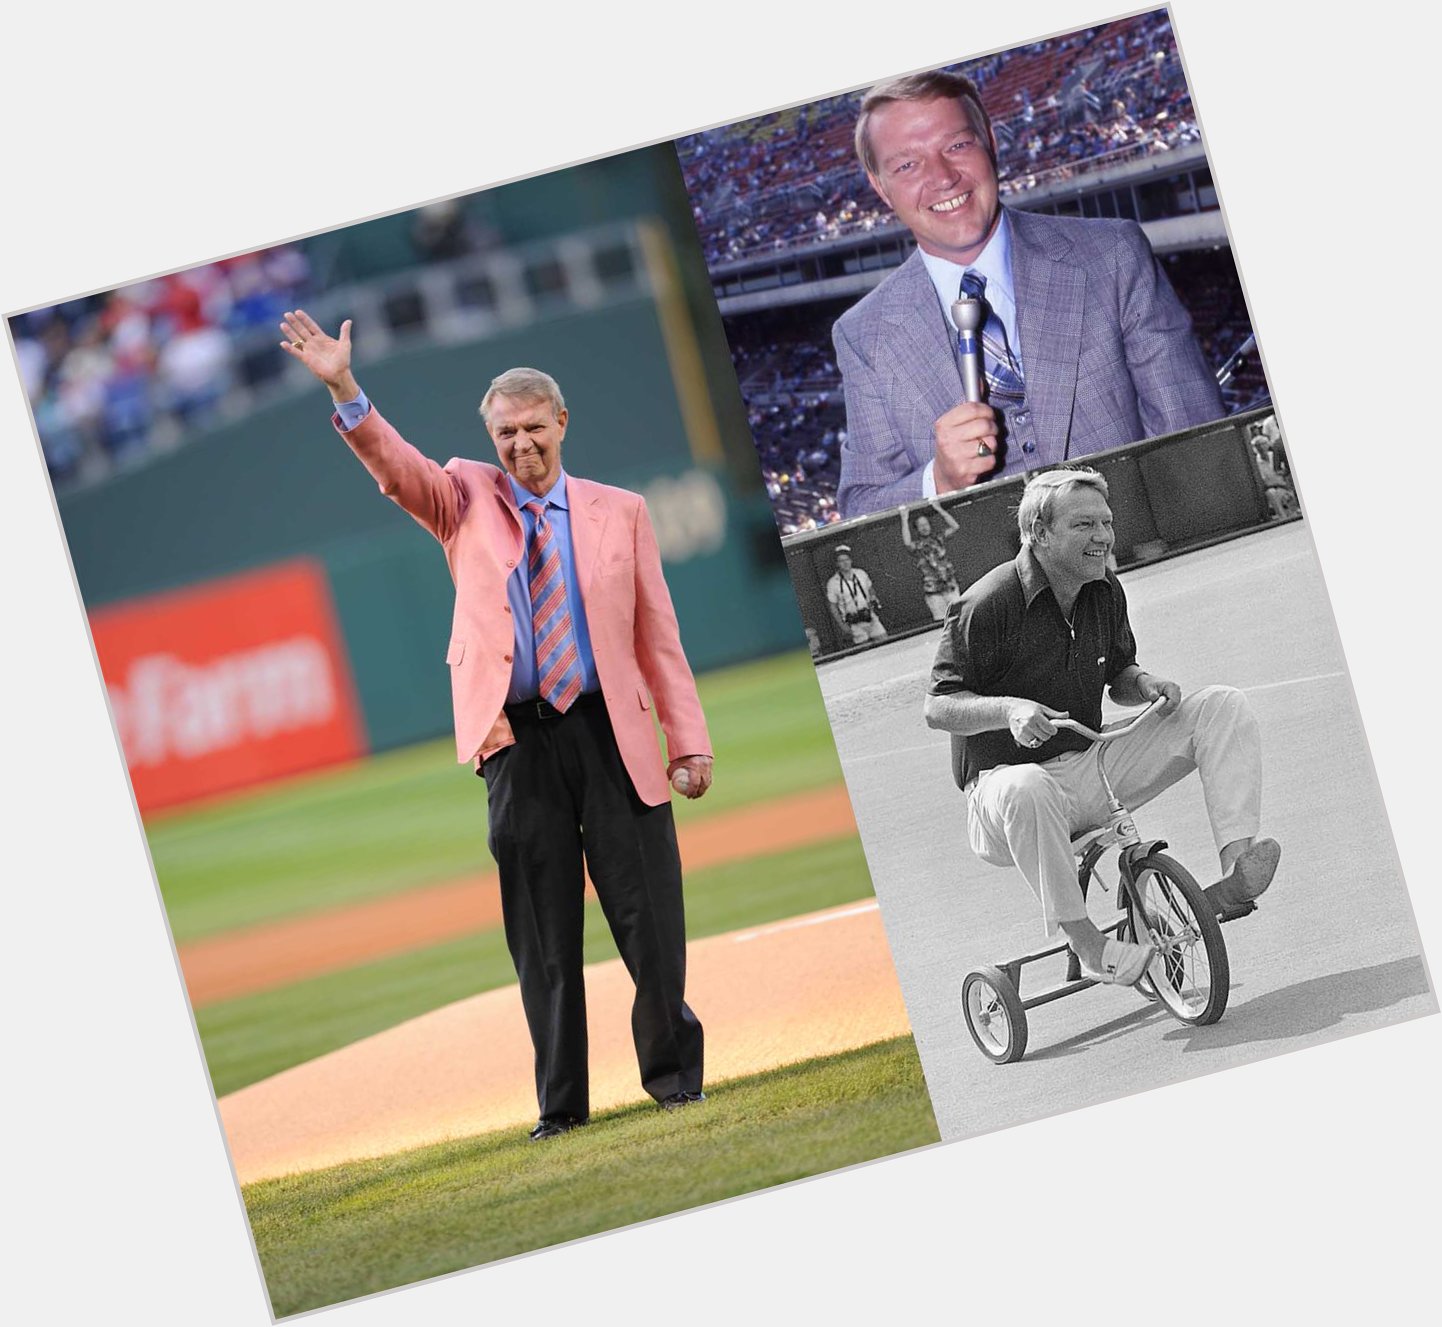  Swing and a long drive  Happy birthday to the Hall of Fame broadcaster, Harry Kalas. 